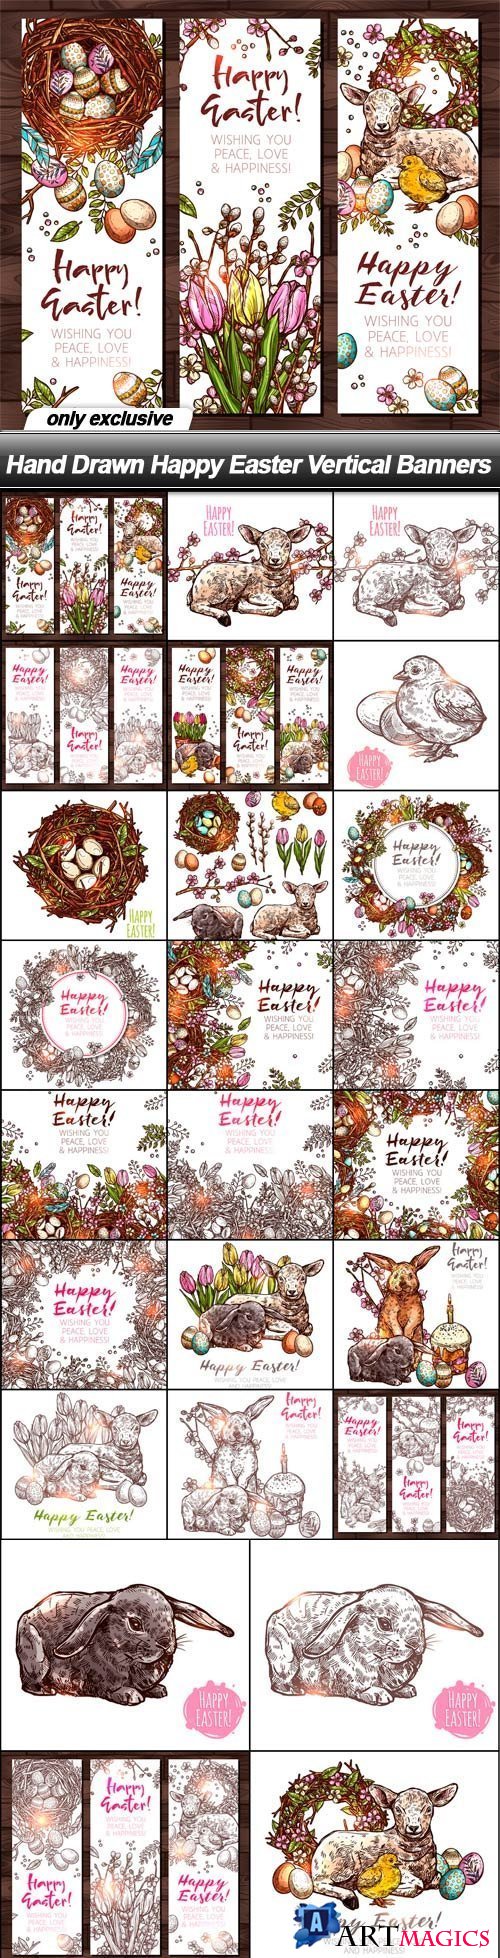 Hand Drawn Happy Easter Vertical Banners - 29 EPS